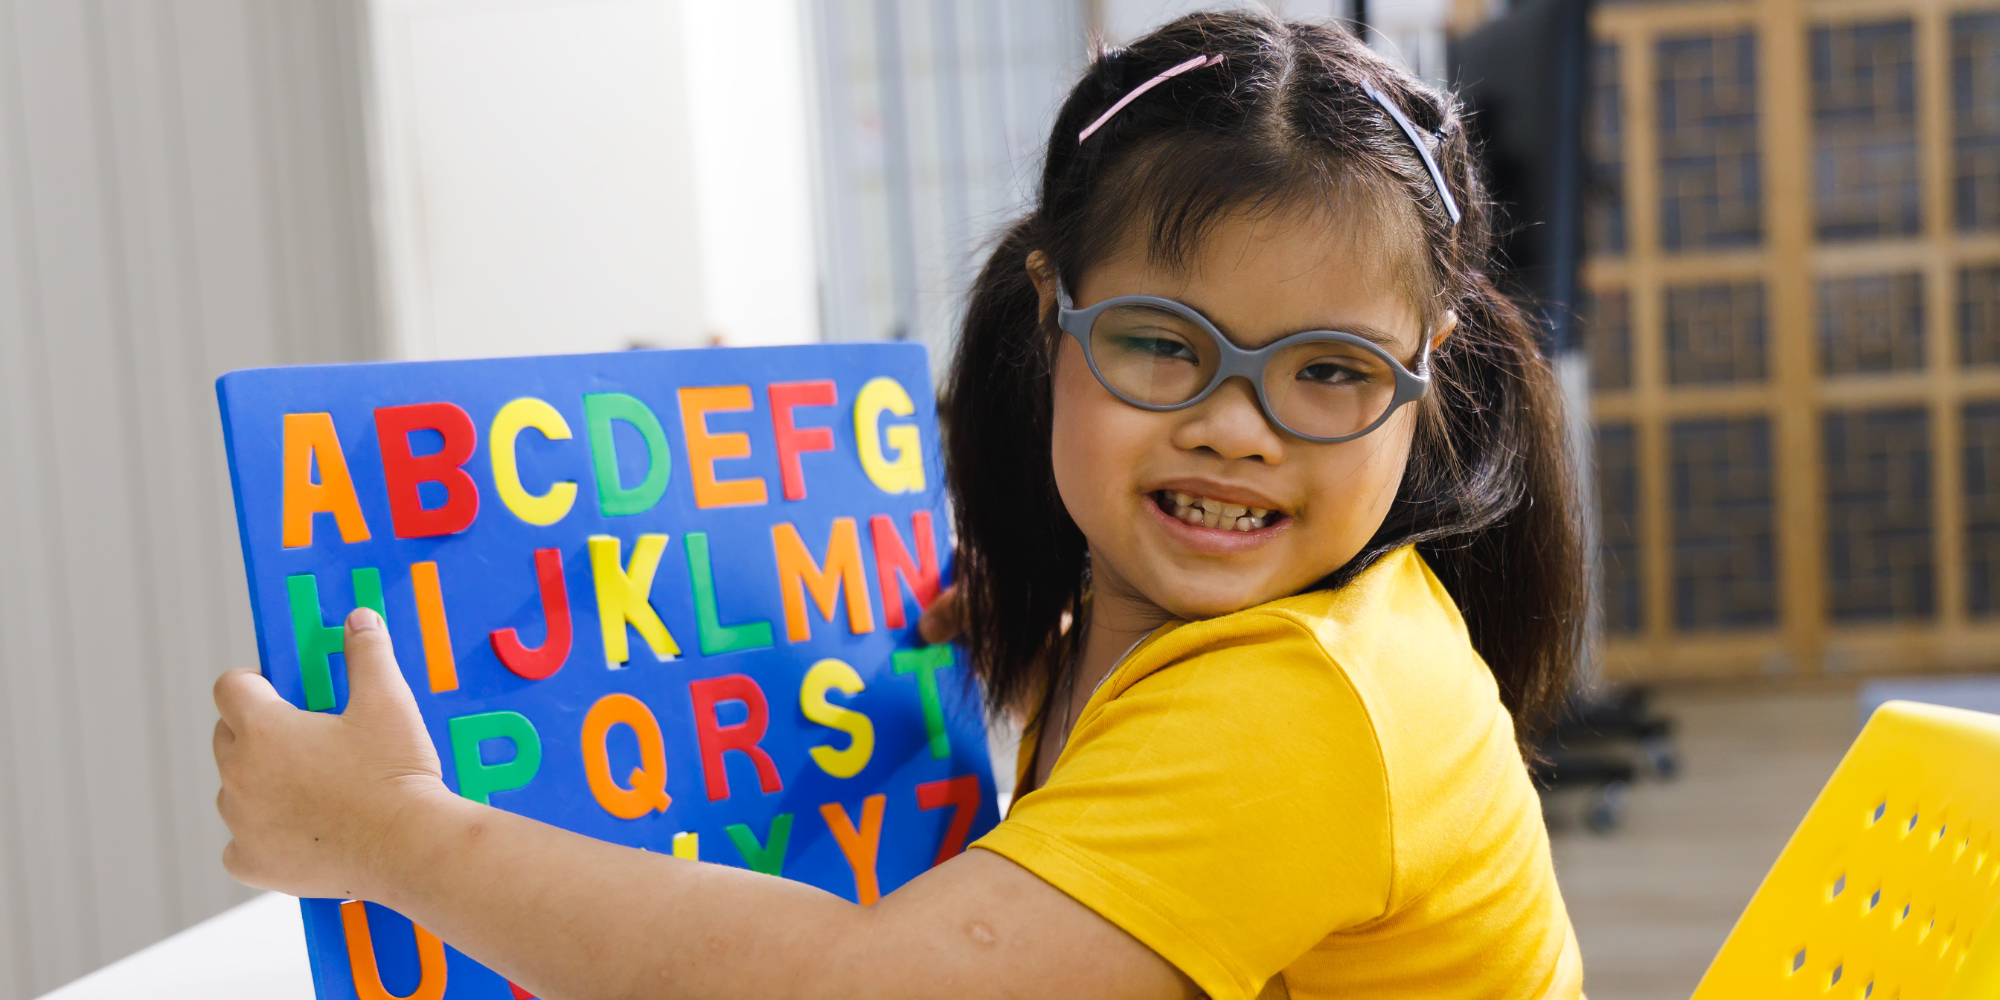 A young brunette girl with Down Syndrome holding up a letter board